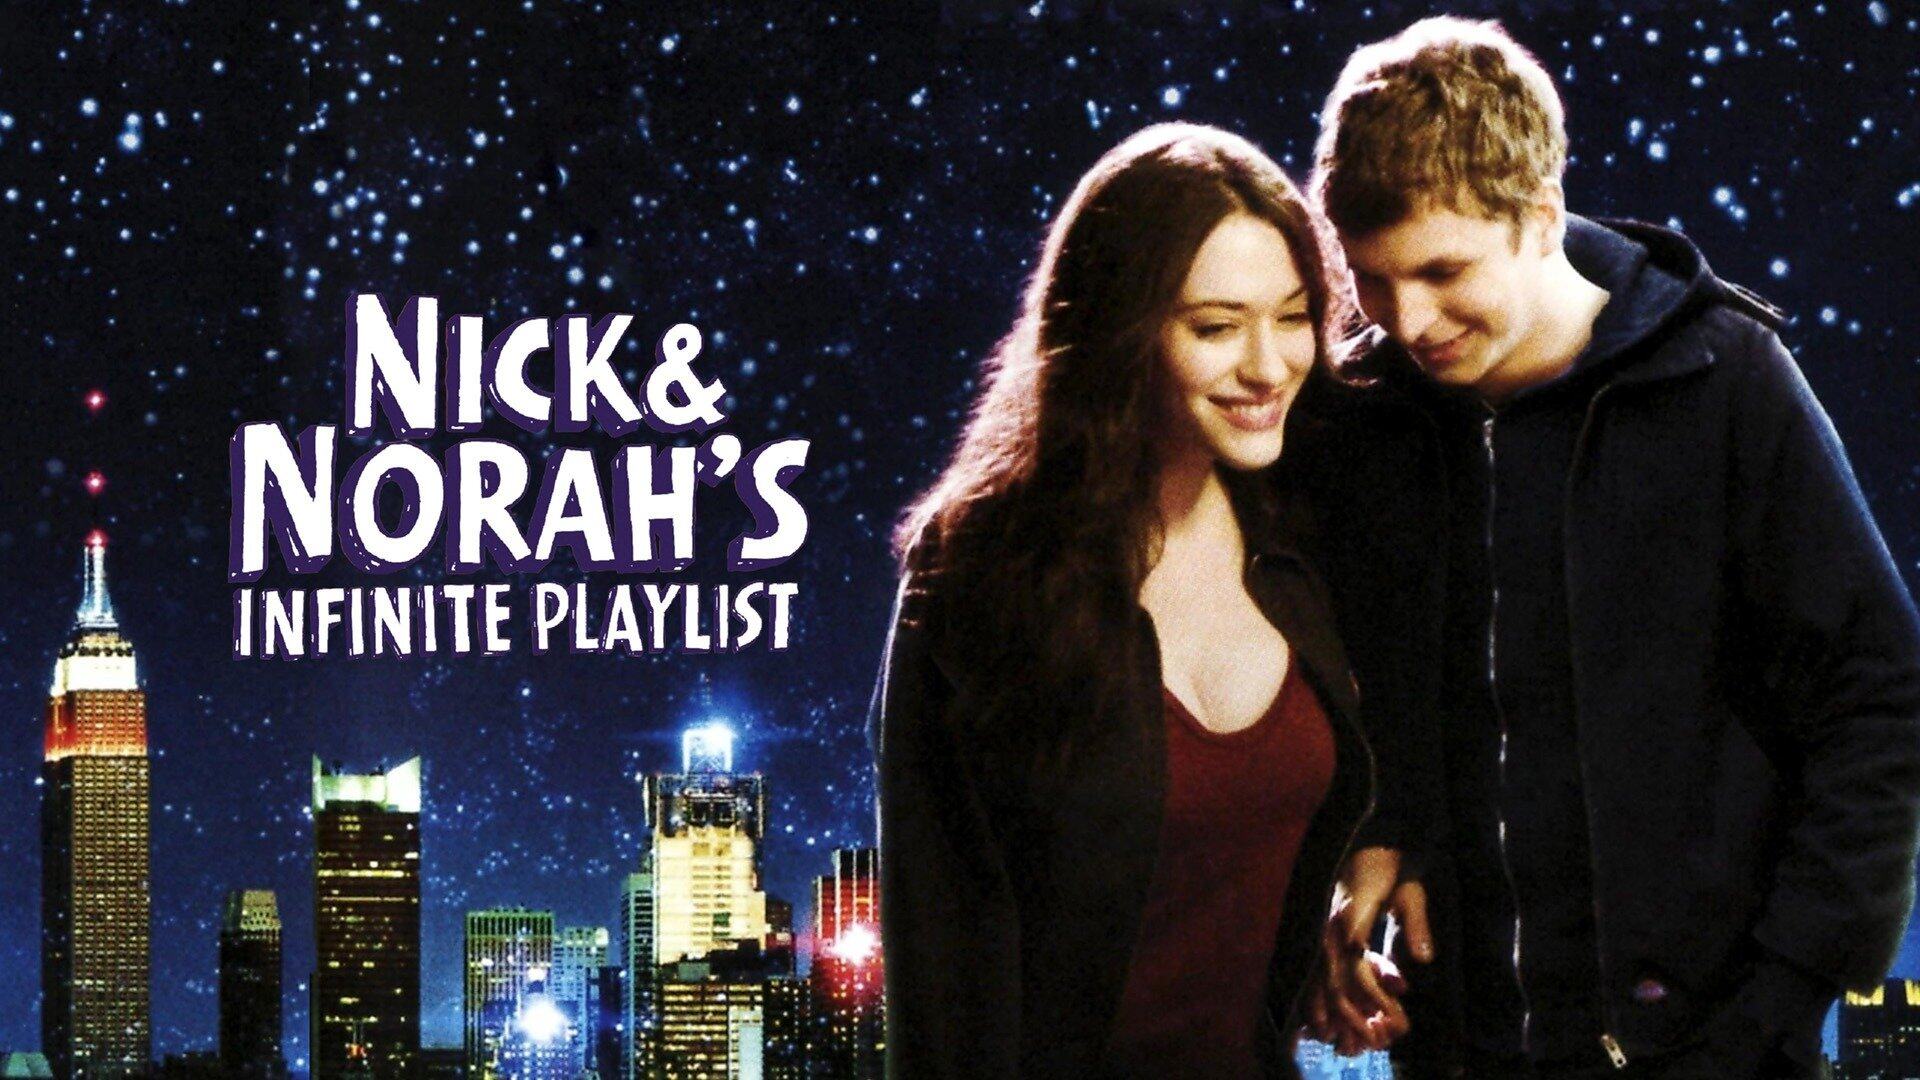 41-facts-about-the-movie-nick-and-norahs-infinite-playlist